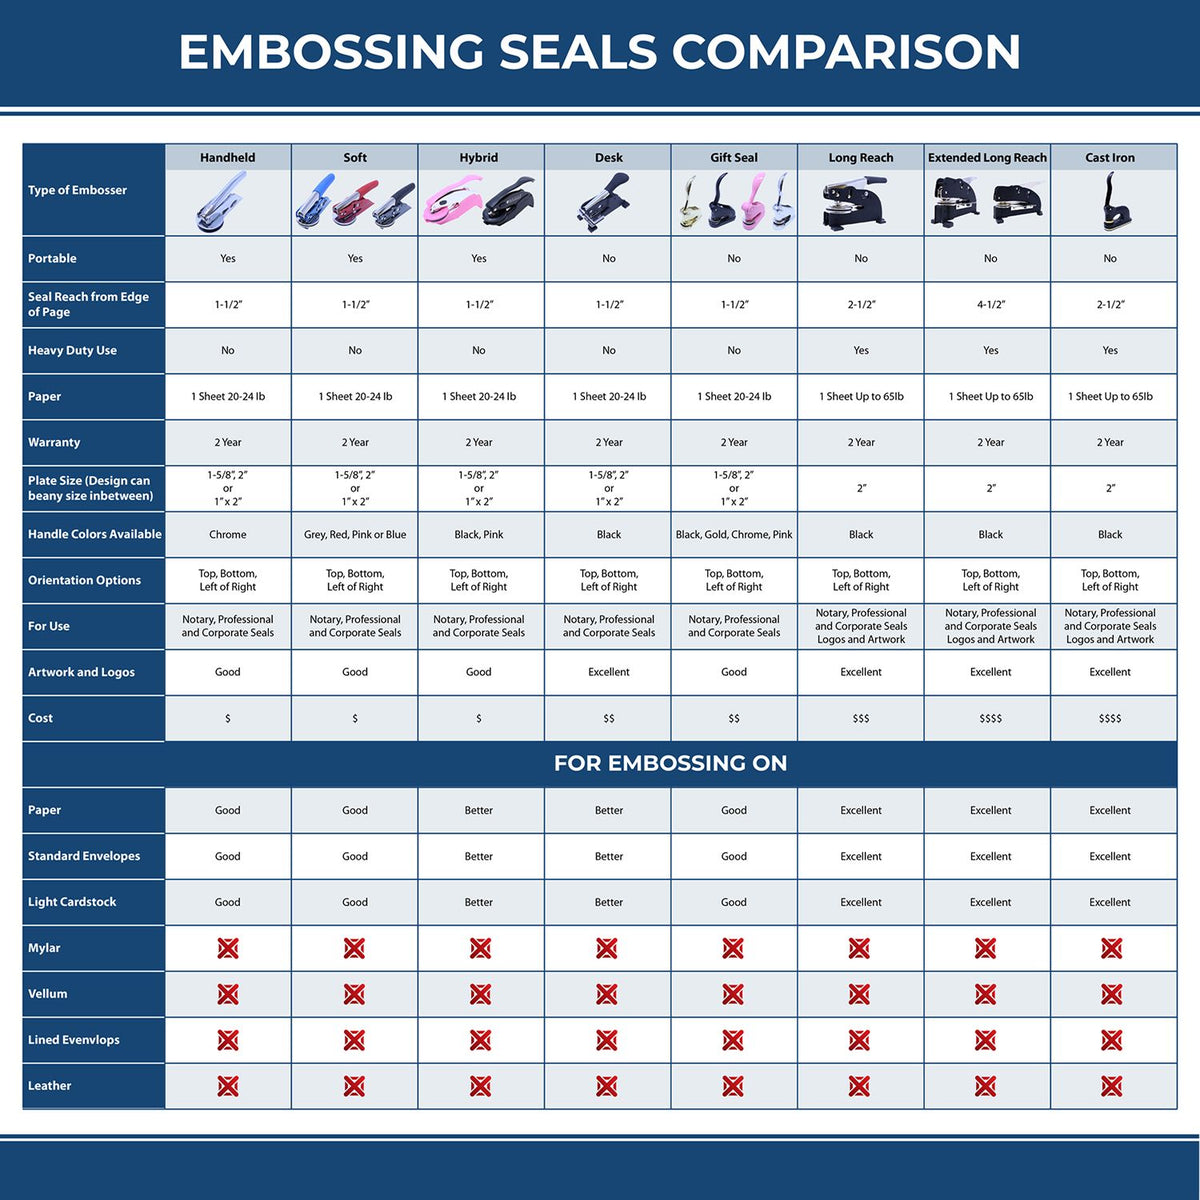 A comparison chart for the different types of mount models available for the State of Pennsylvania Architectural Seal Embosser.